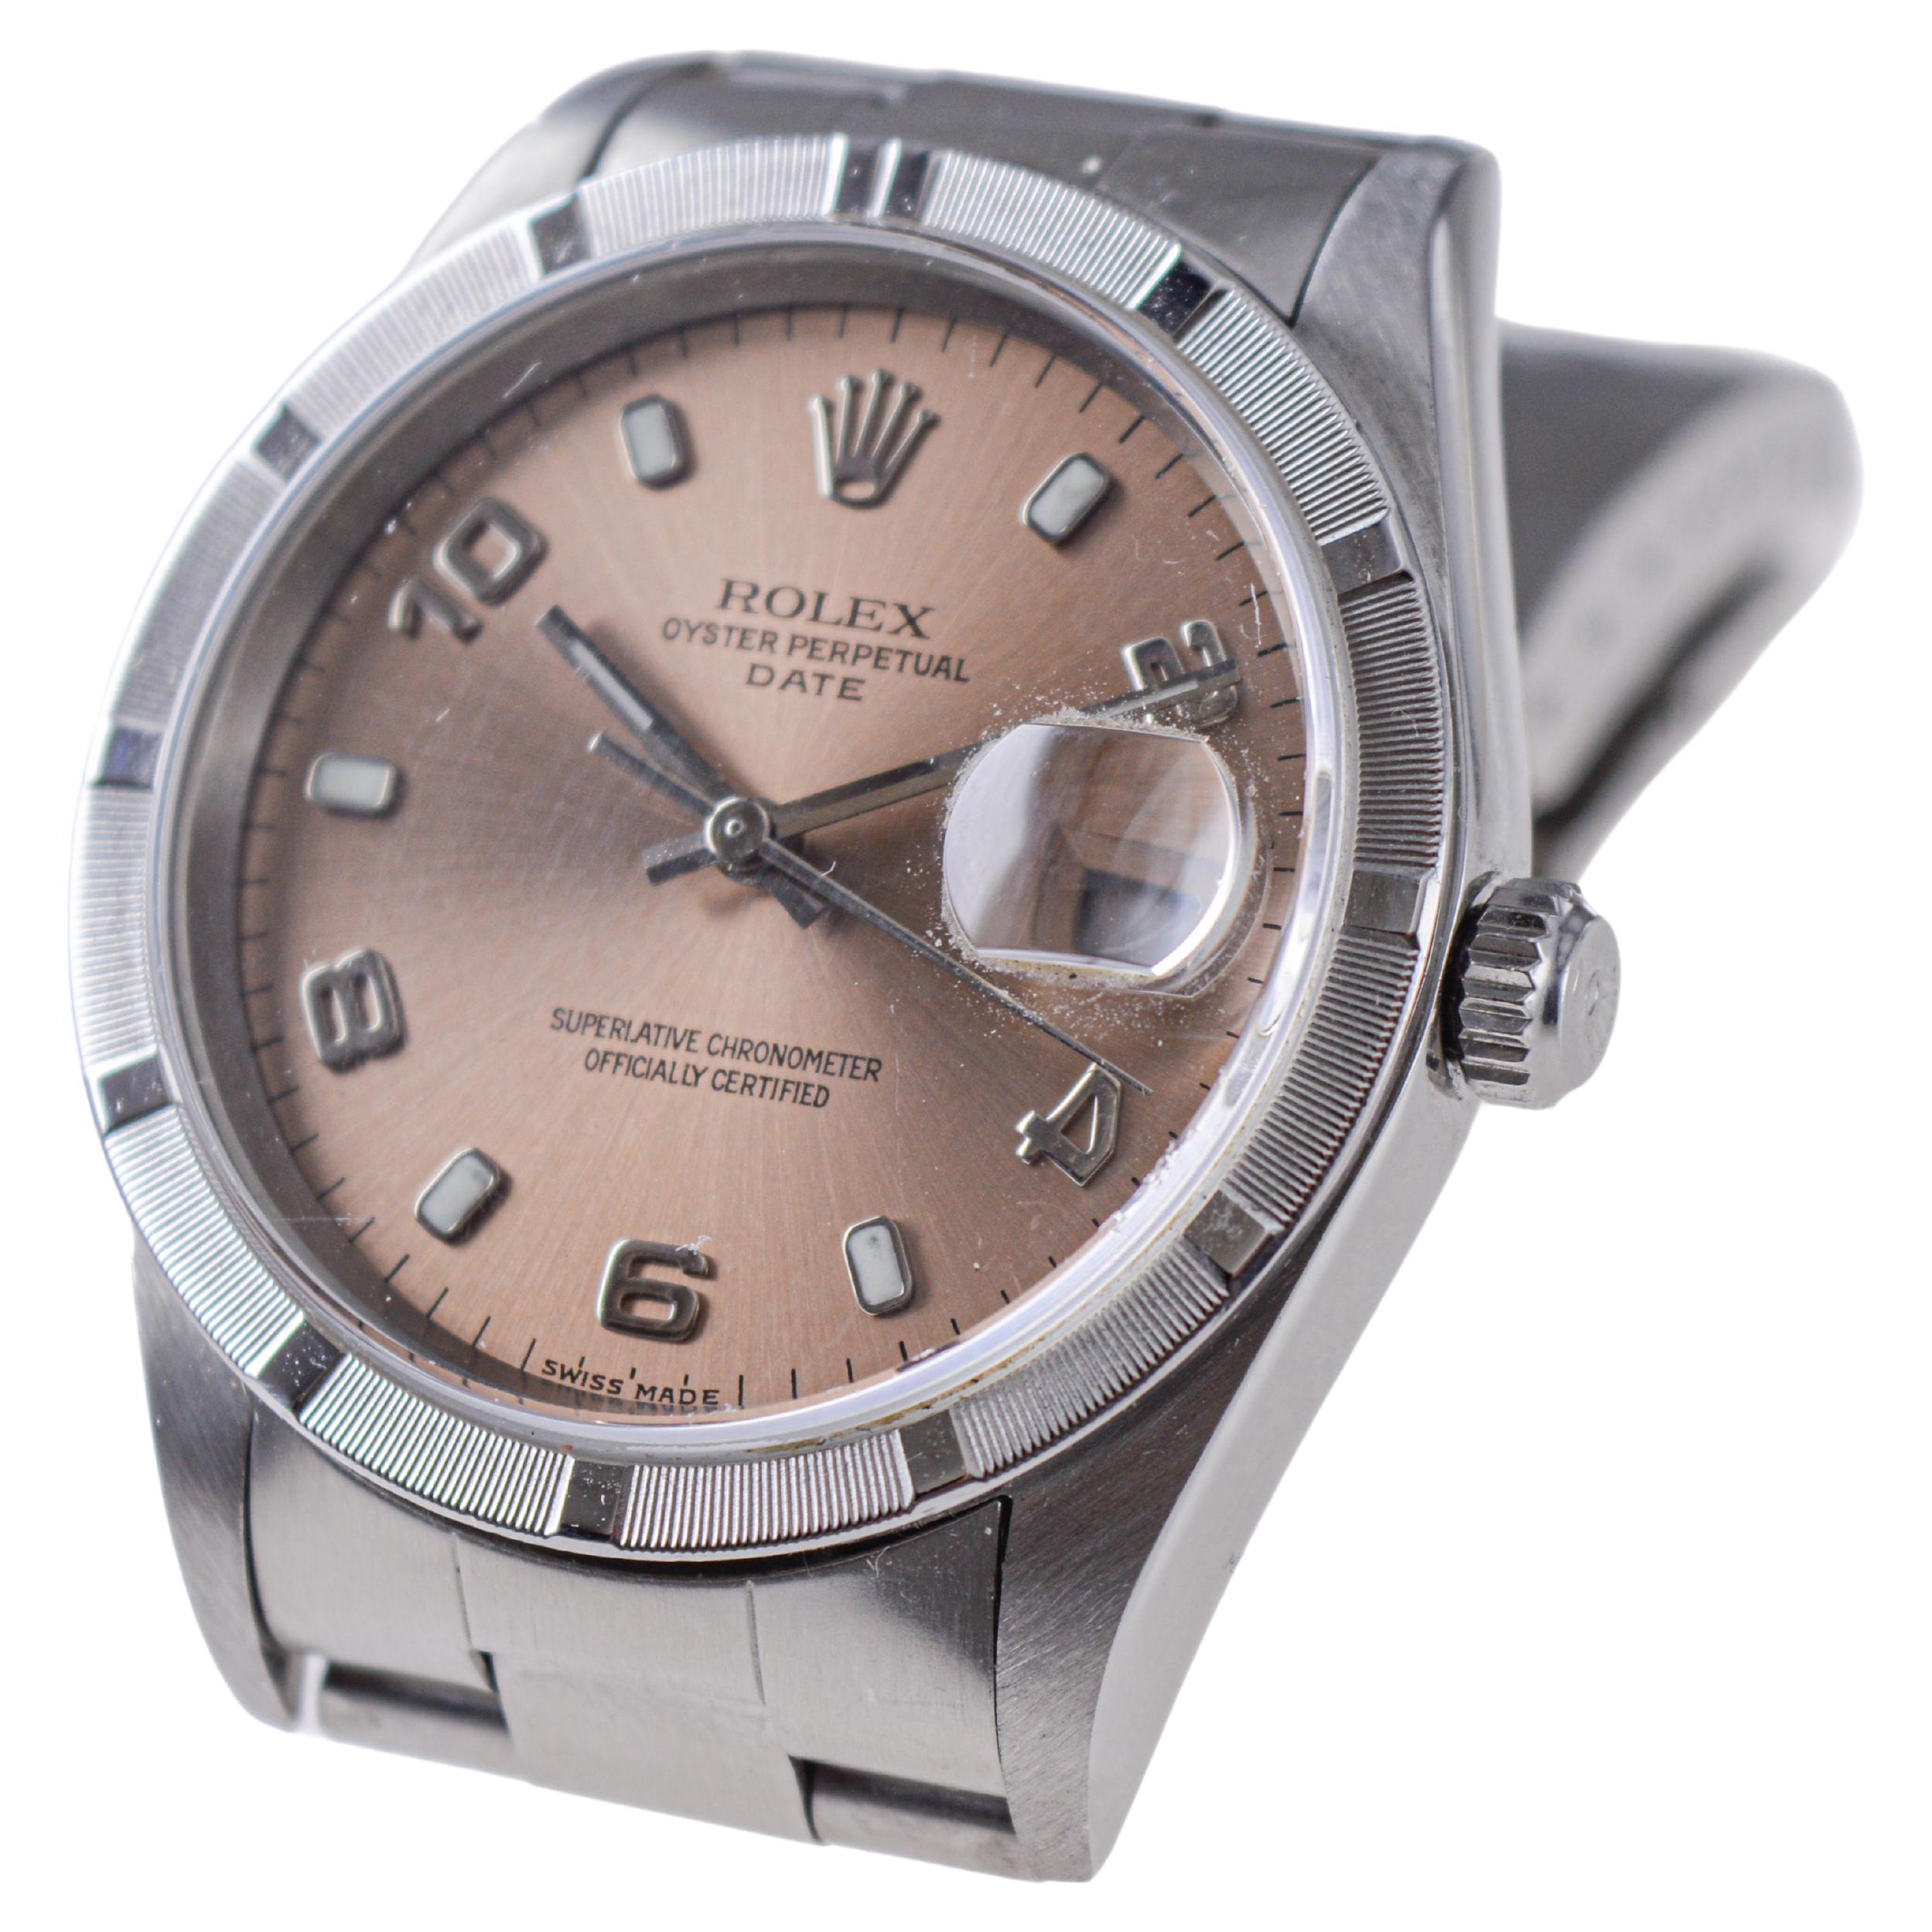 Rolex Steel Oyster Perpetual Date with Exceptional Bronze Dial circa, 2000 For Sale 2